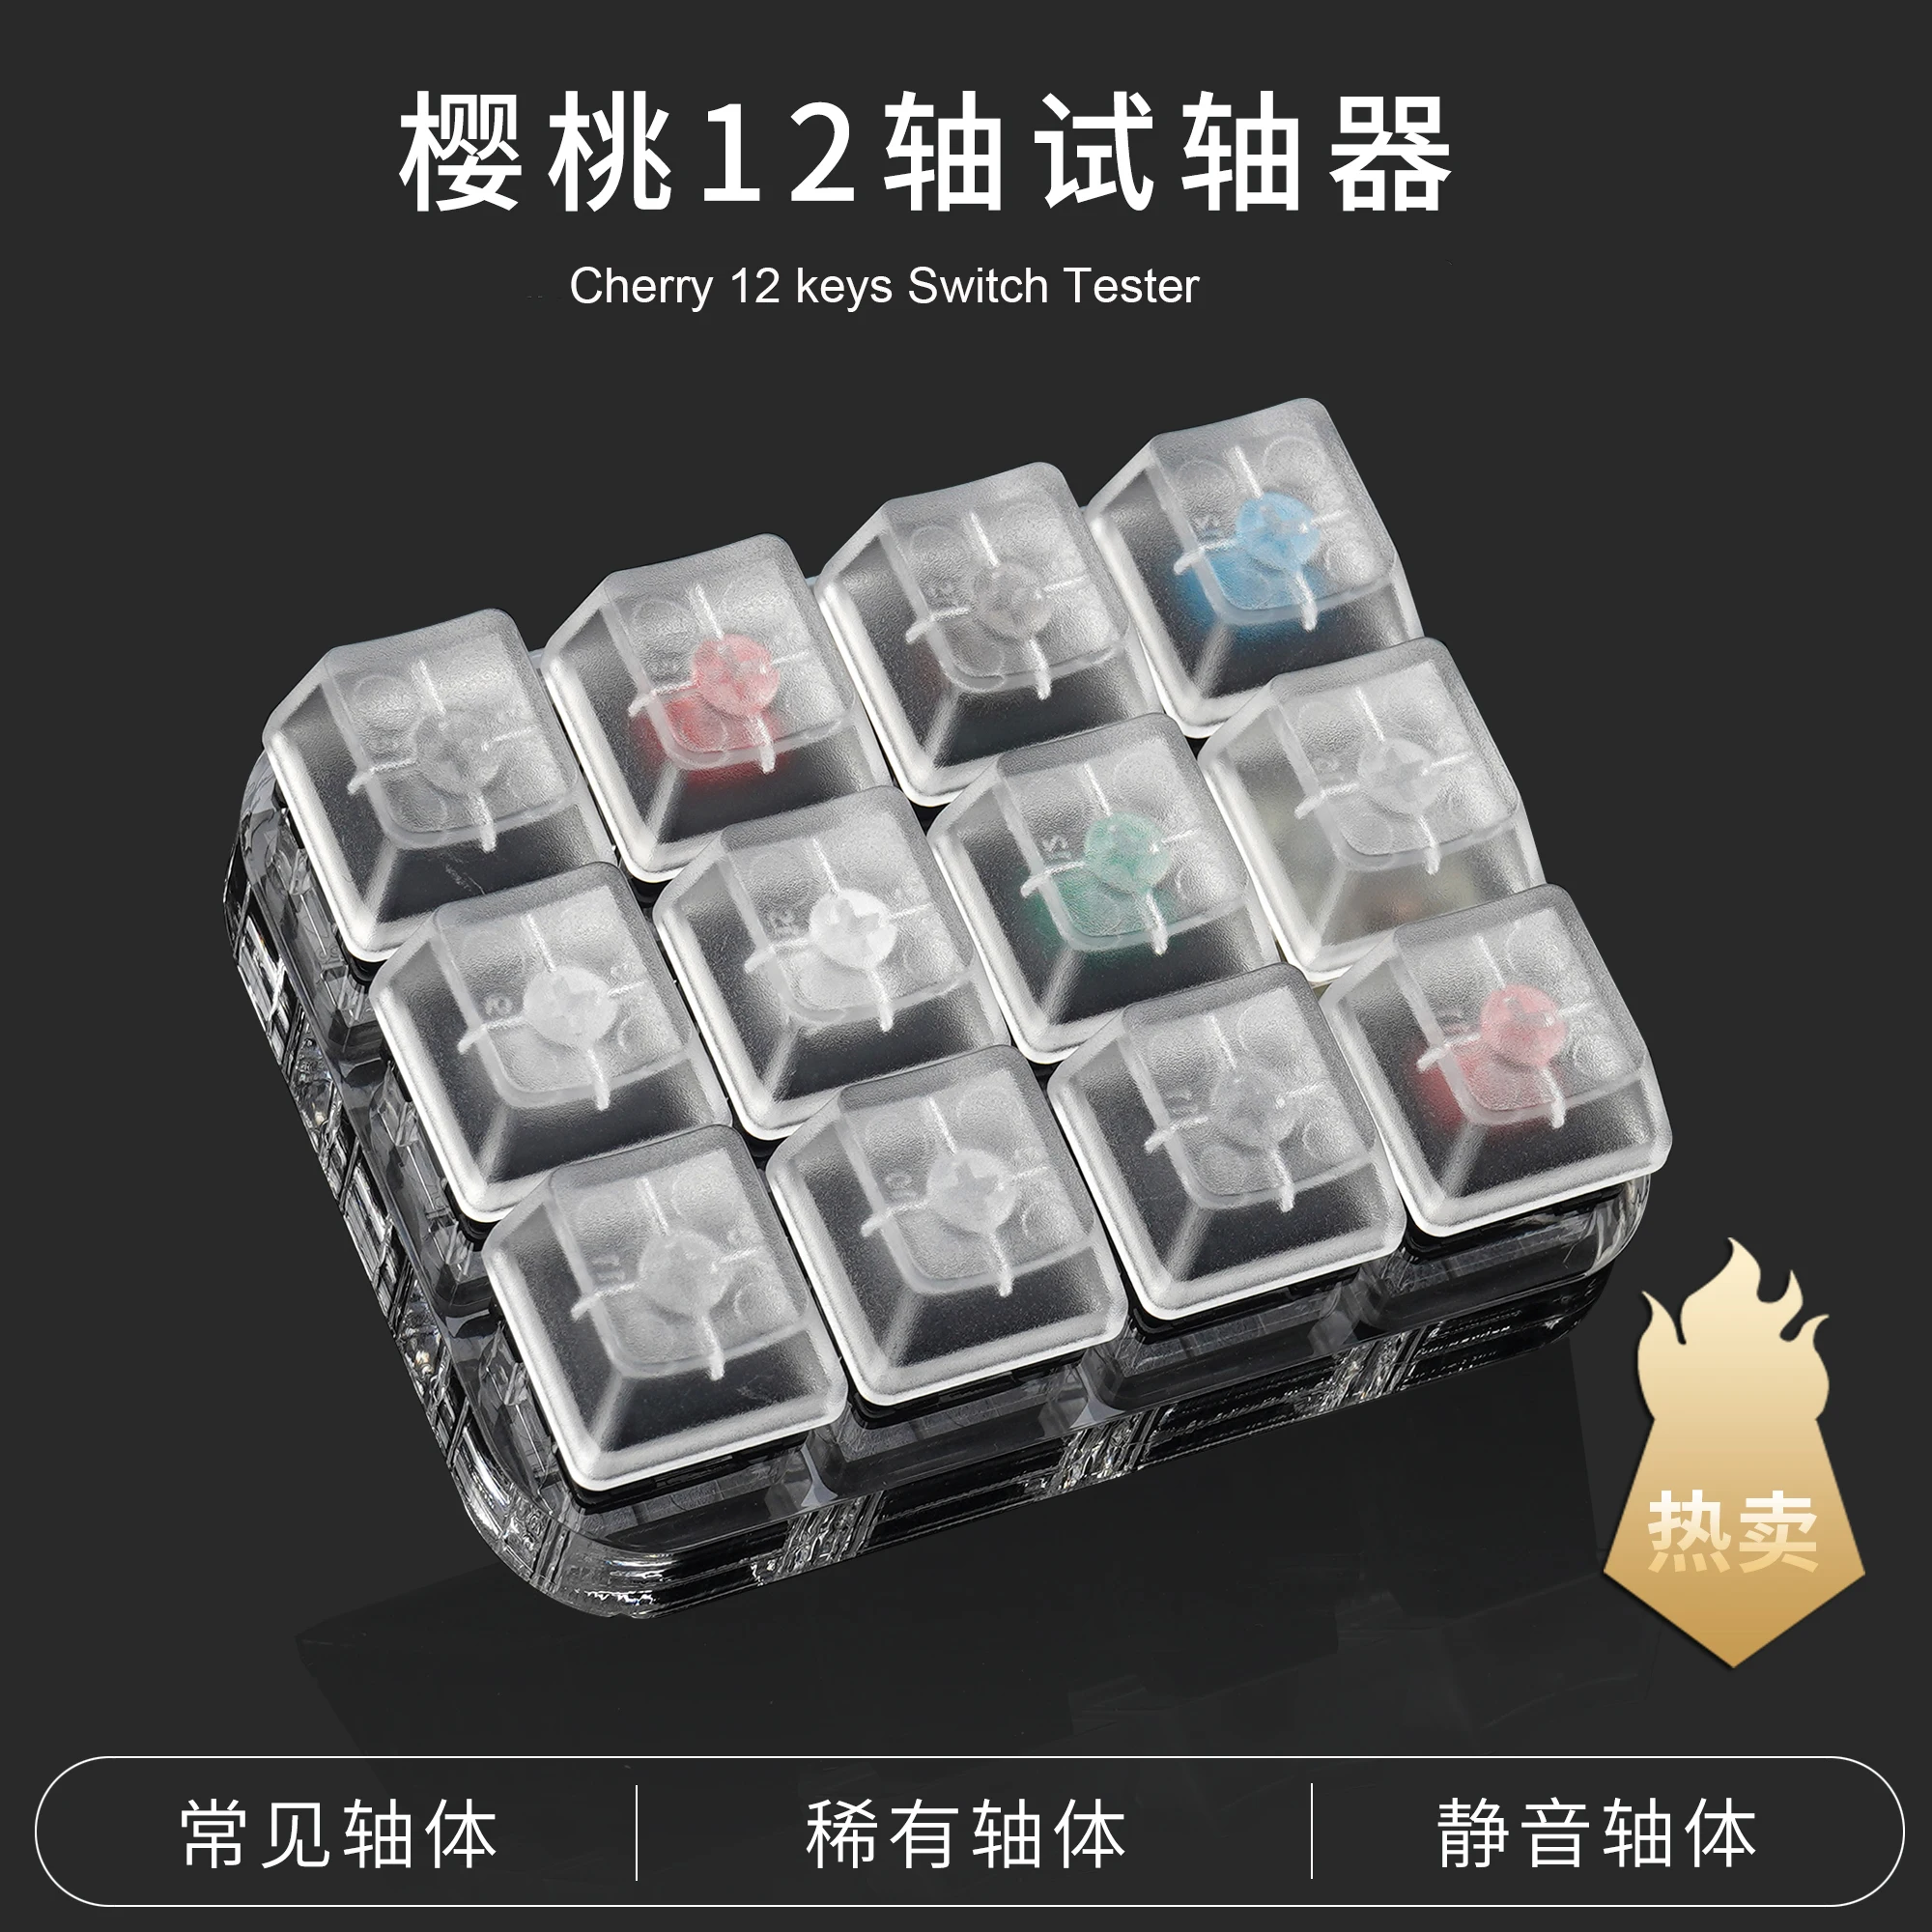 Switch Tester Cherry MX Kailh Switches black red brown blue 4 6 8 9 12 Key Translucent Keycaps Mechanical Keyboard Tester